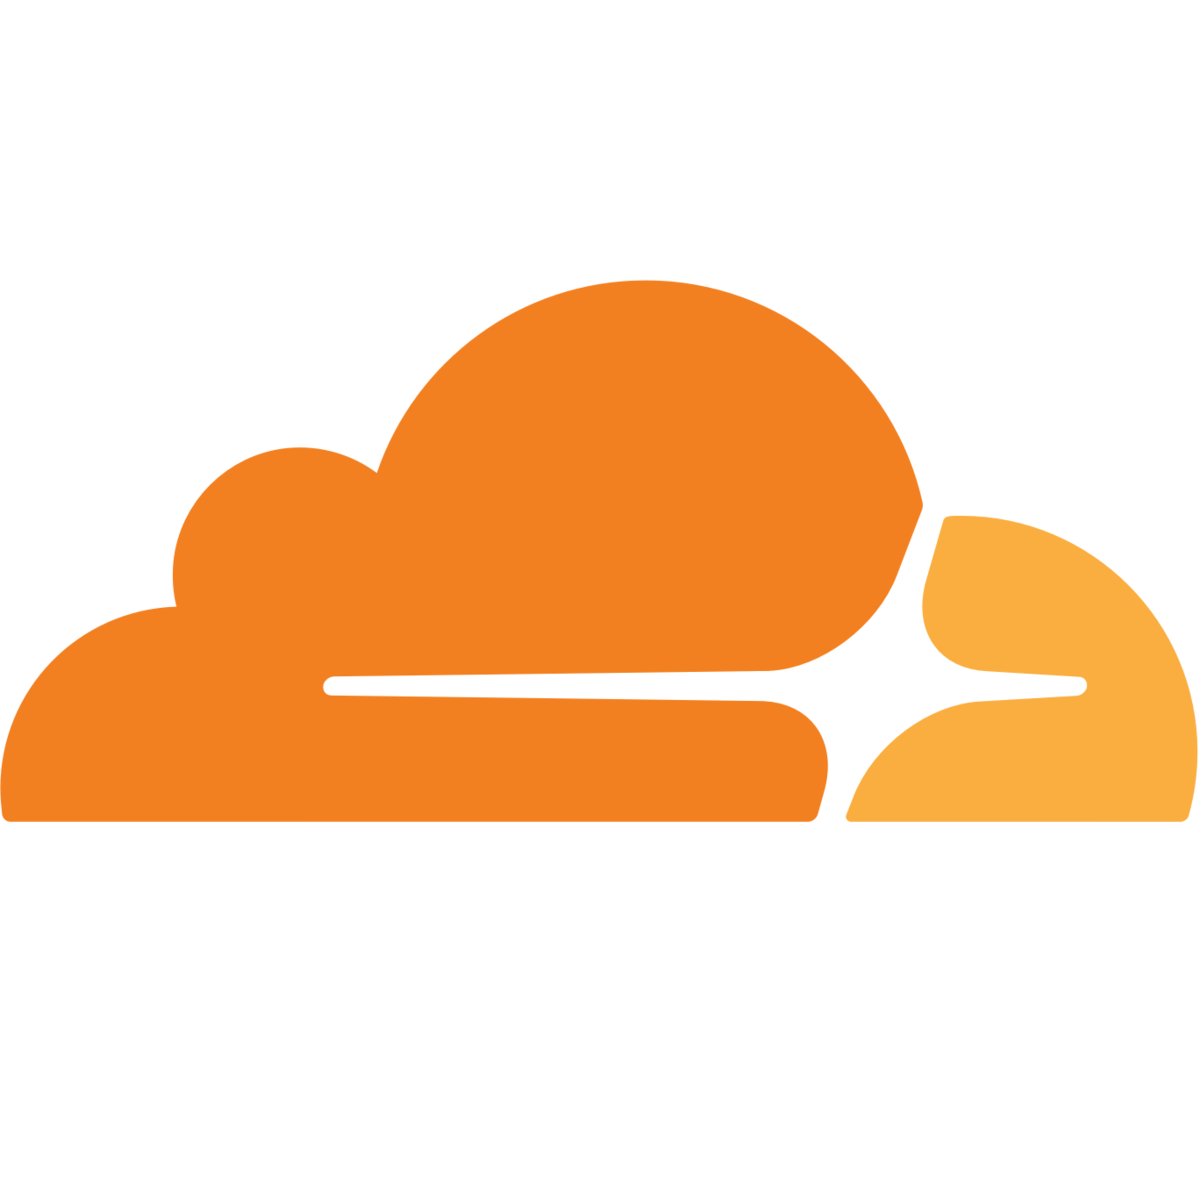 The Cloudflare logo, an orange cloud with a lens flare shape in its negative space.